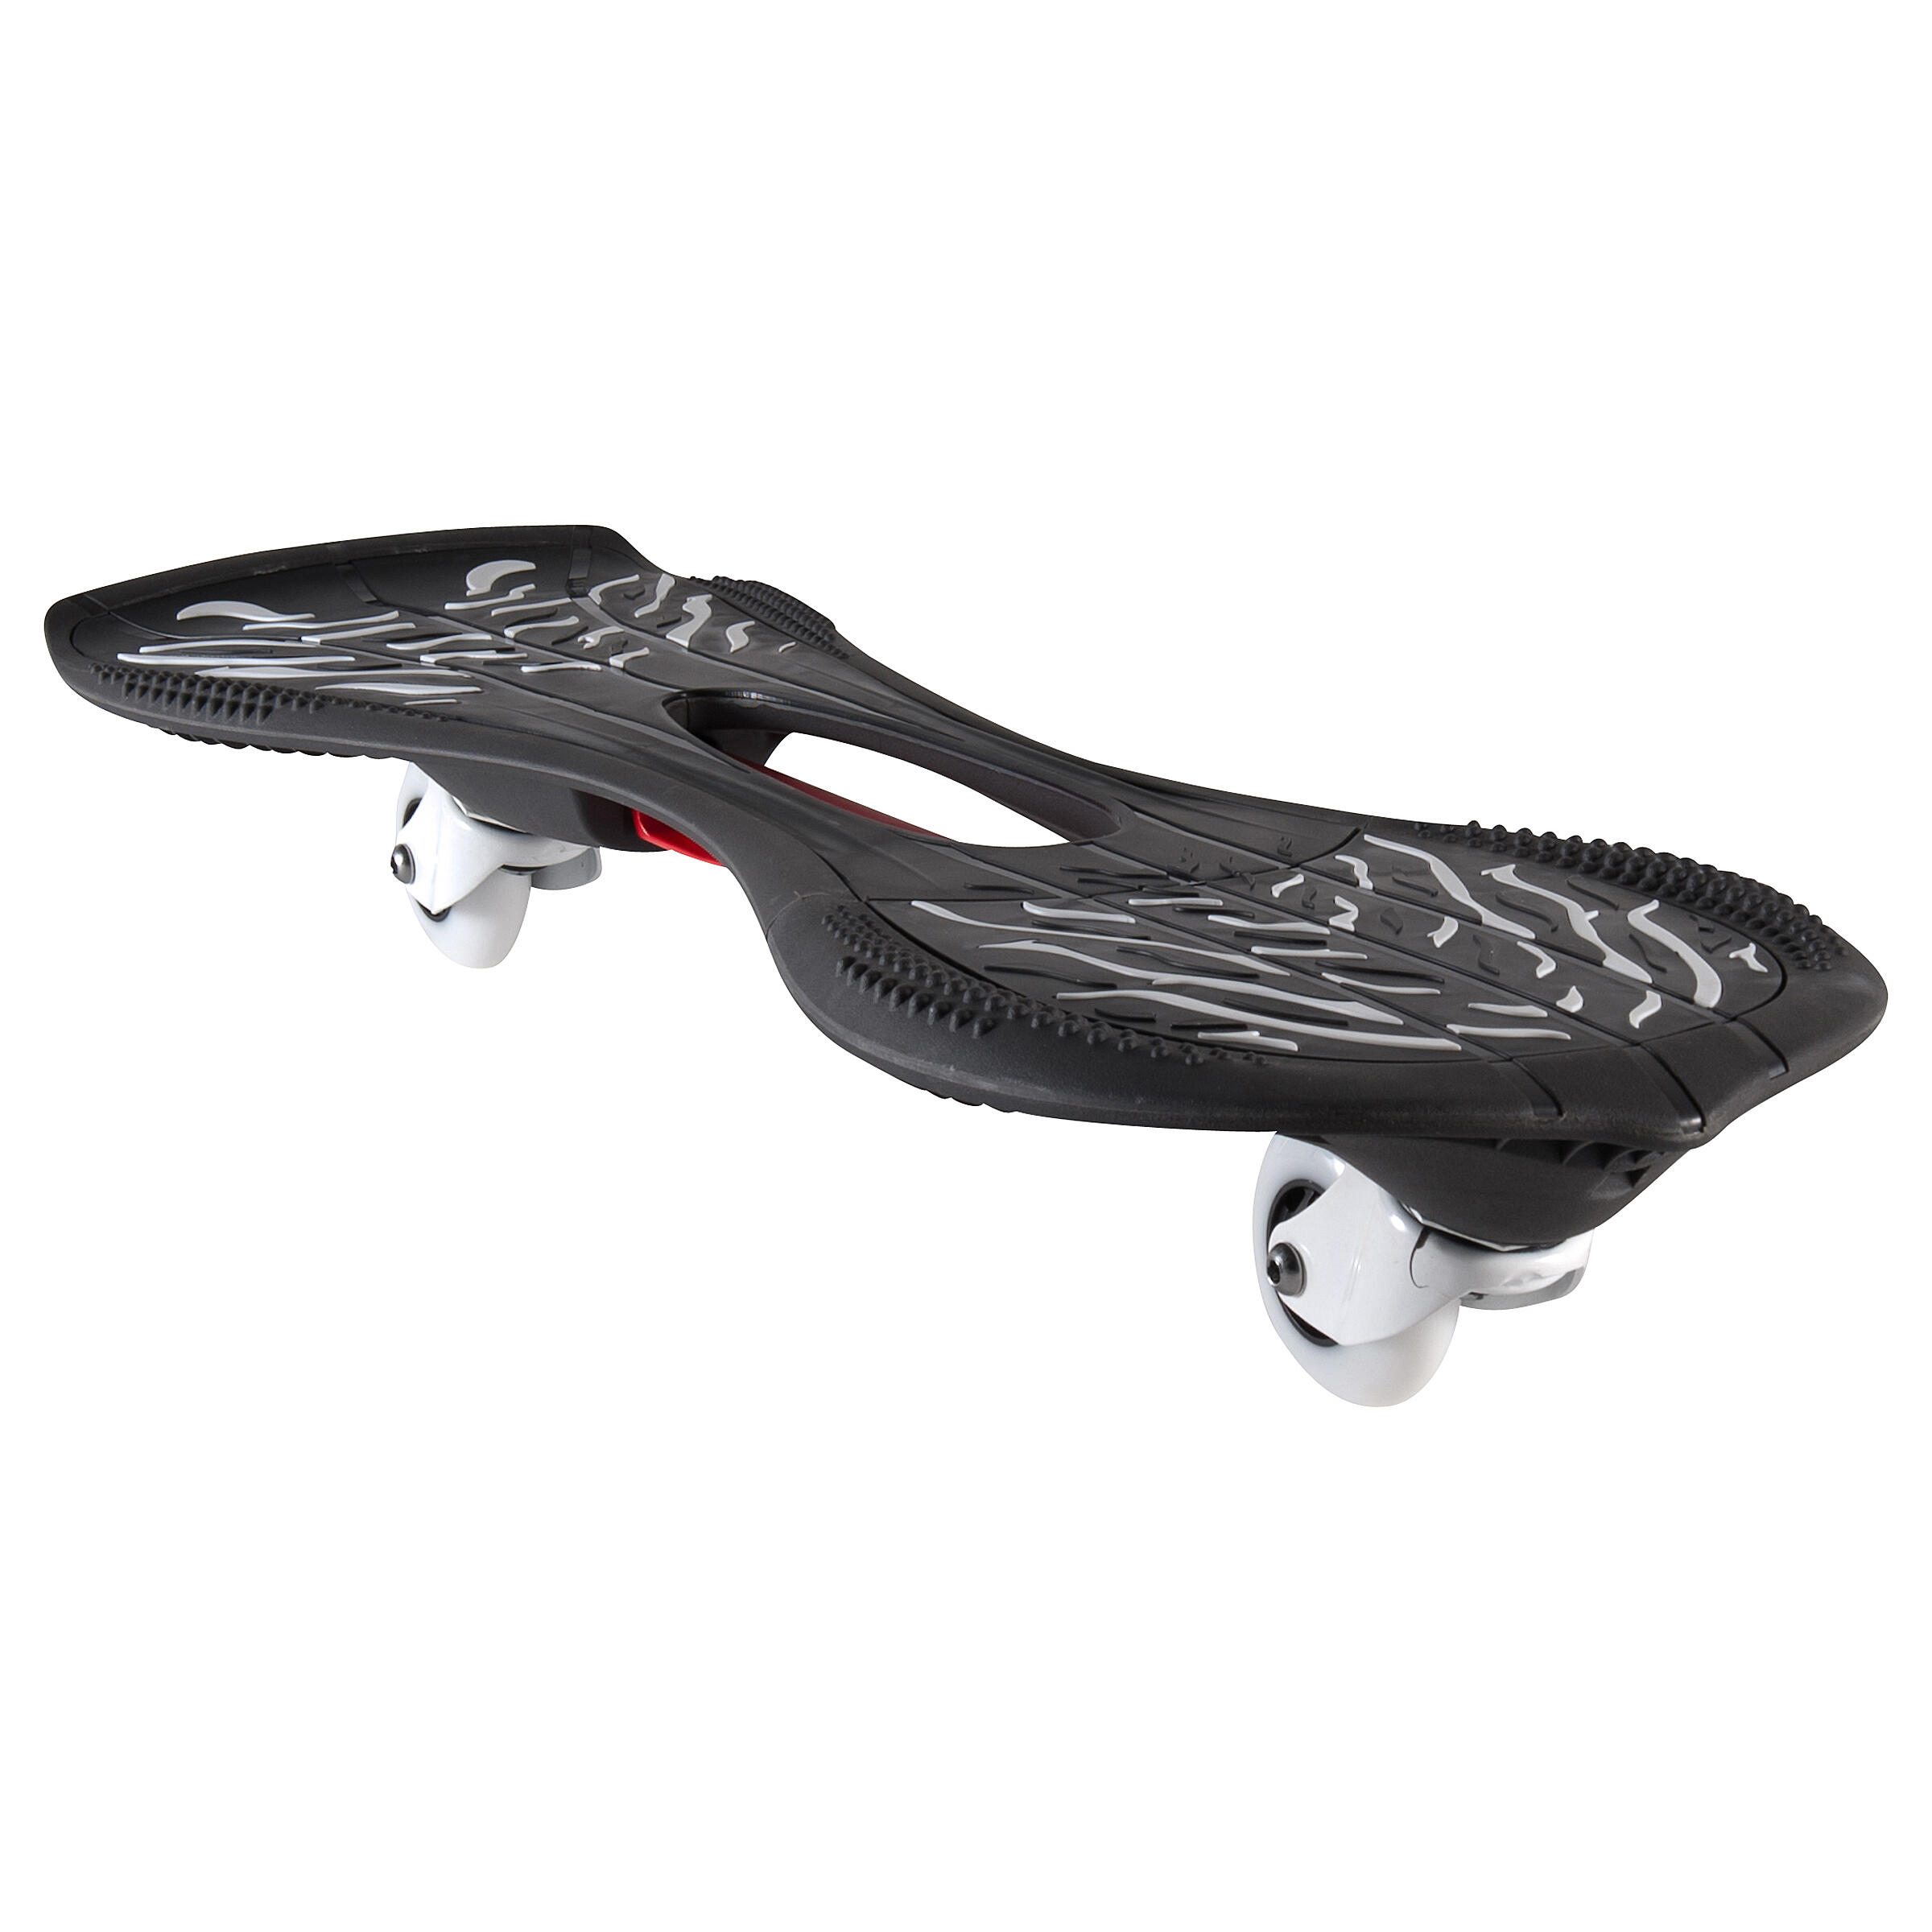 oxelo wave board price